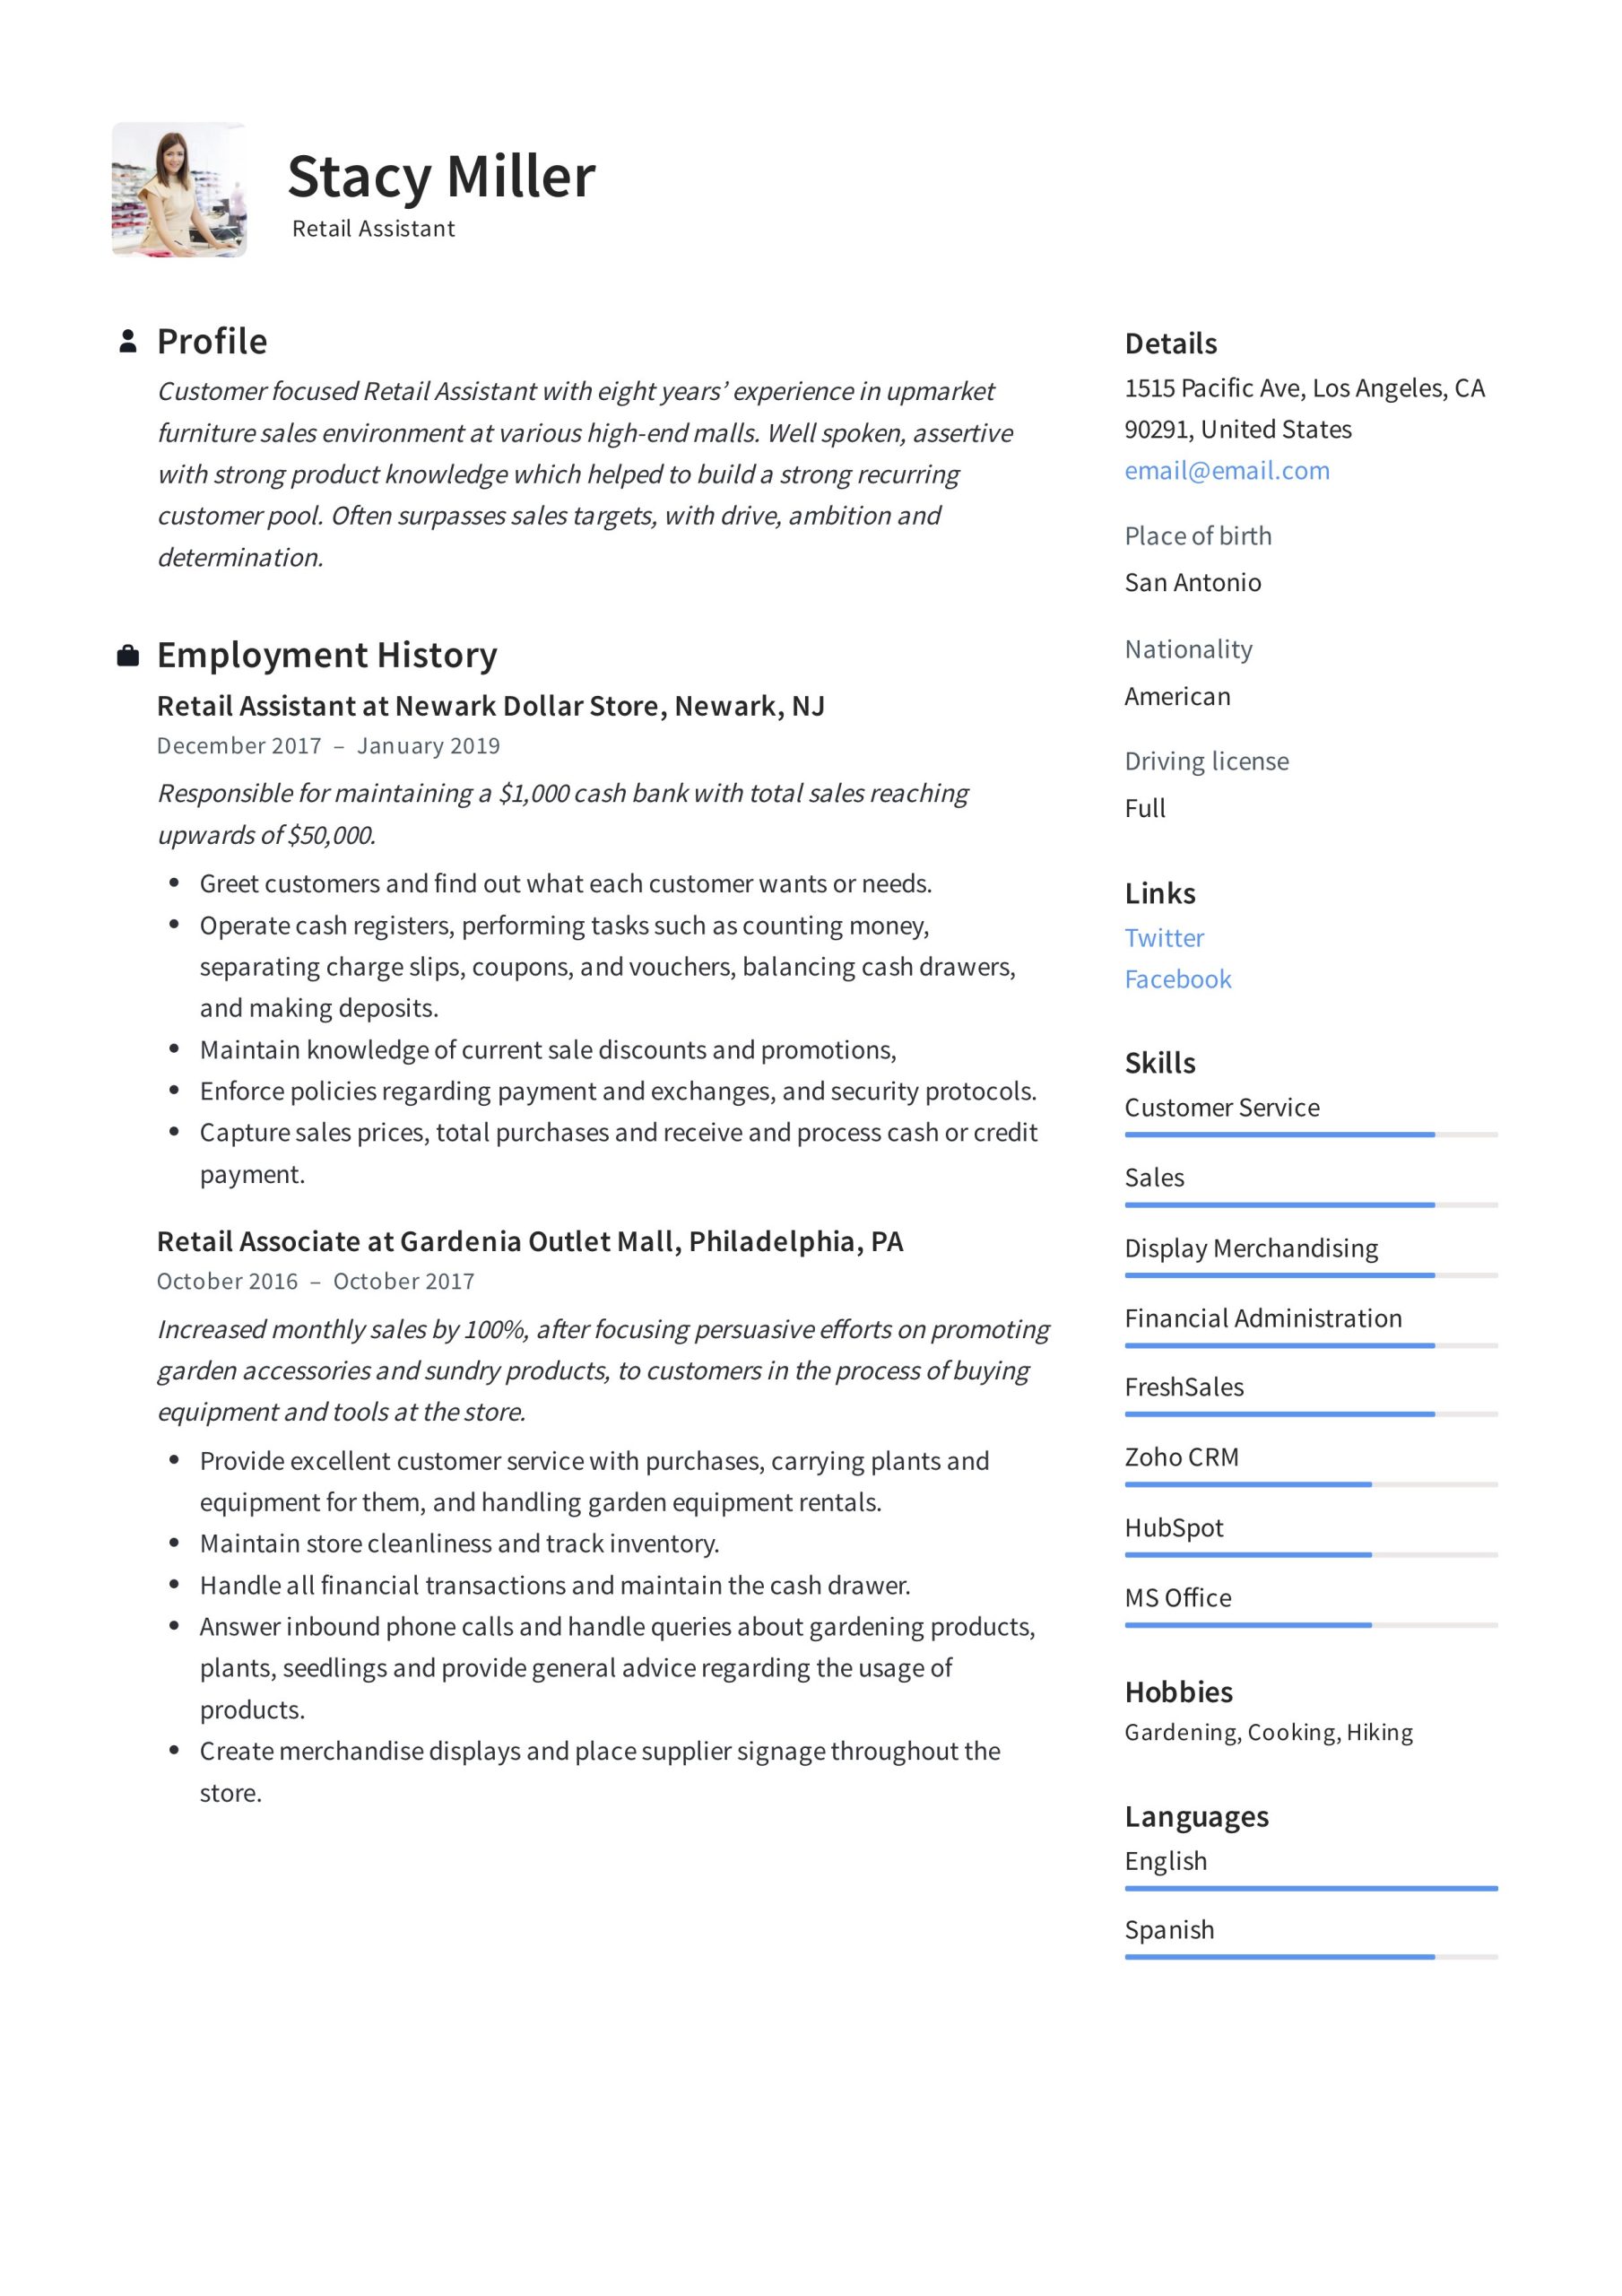 Sample Resume for A Retail Position 12 Retail assistant Resume Samples & Writing Guide – Resumeviking.com